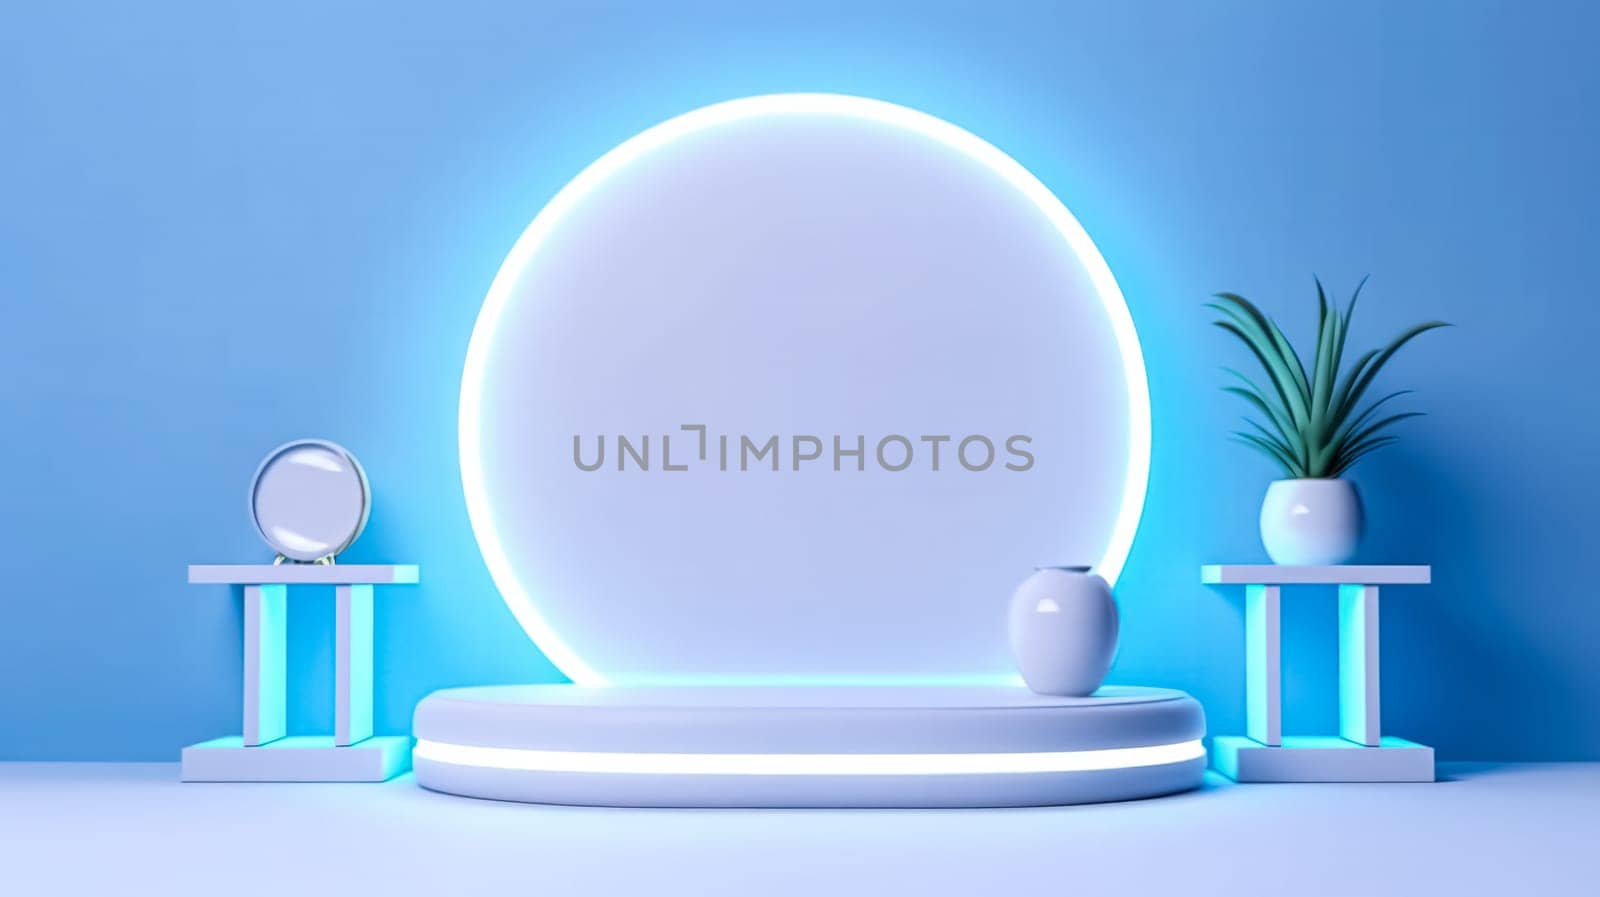 An abstract surreal scene featuring an empty stage with a cylinder podium and circle shape on a holographic neon colored background.